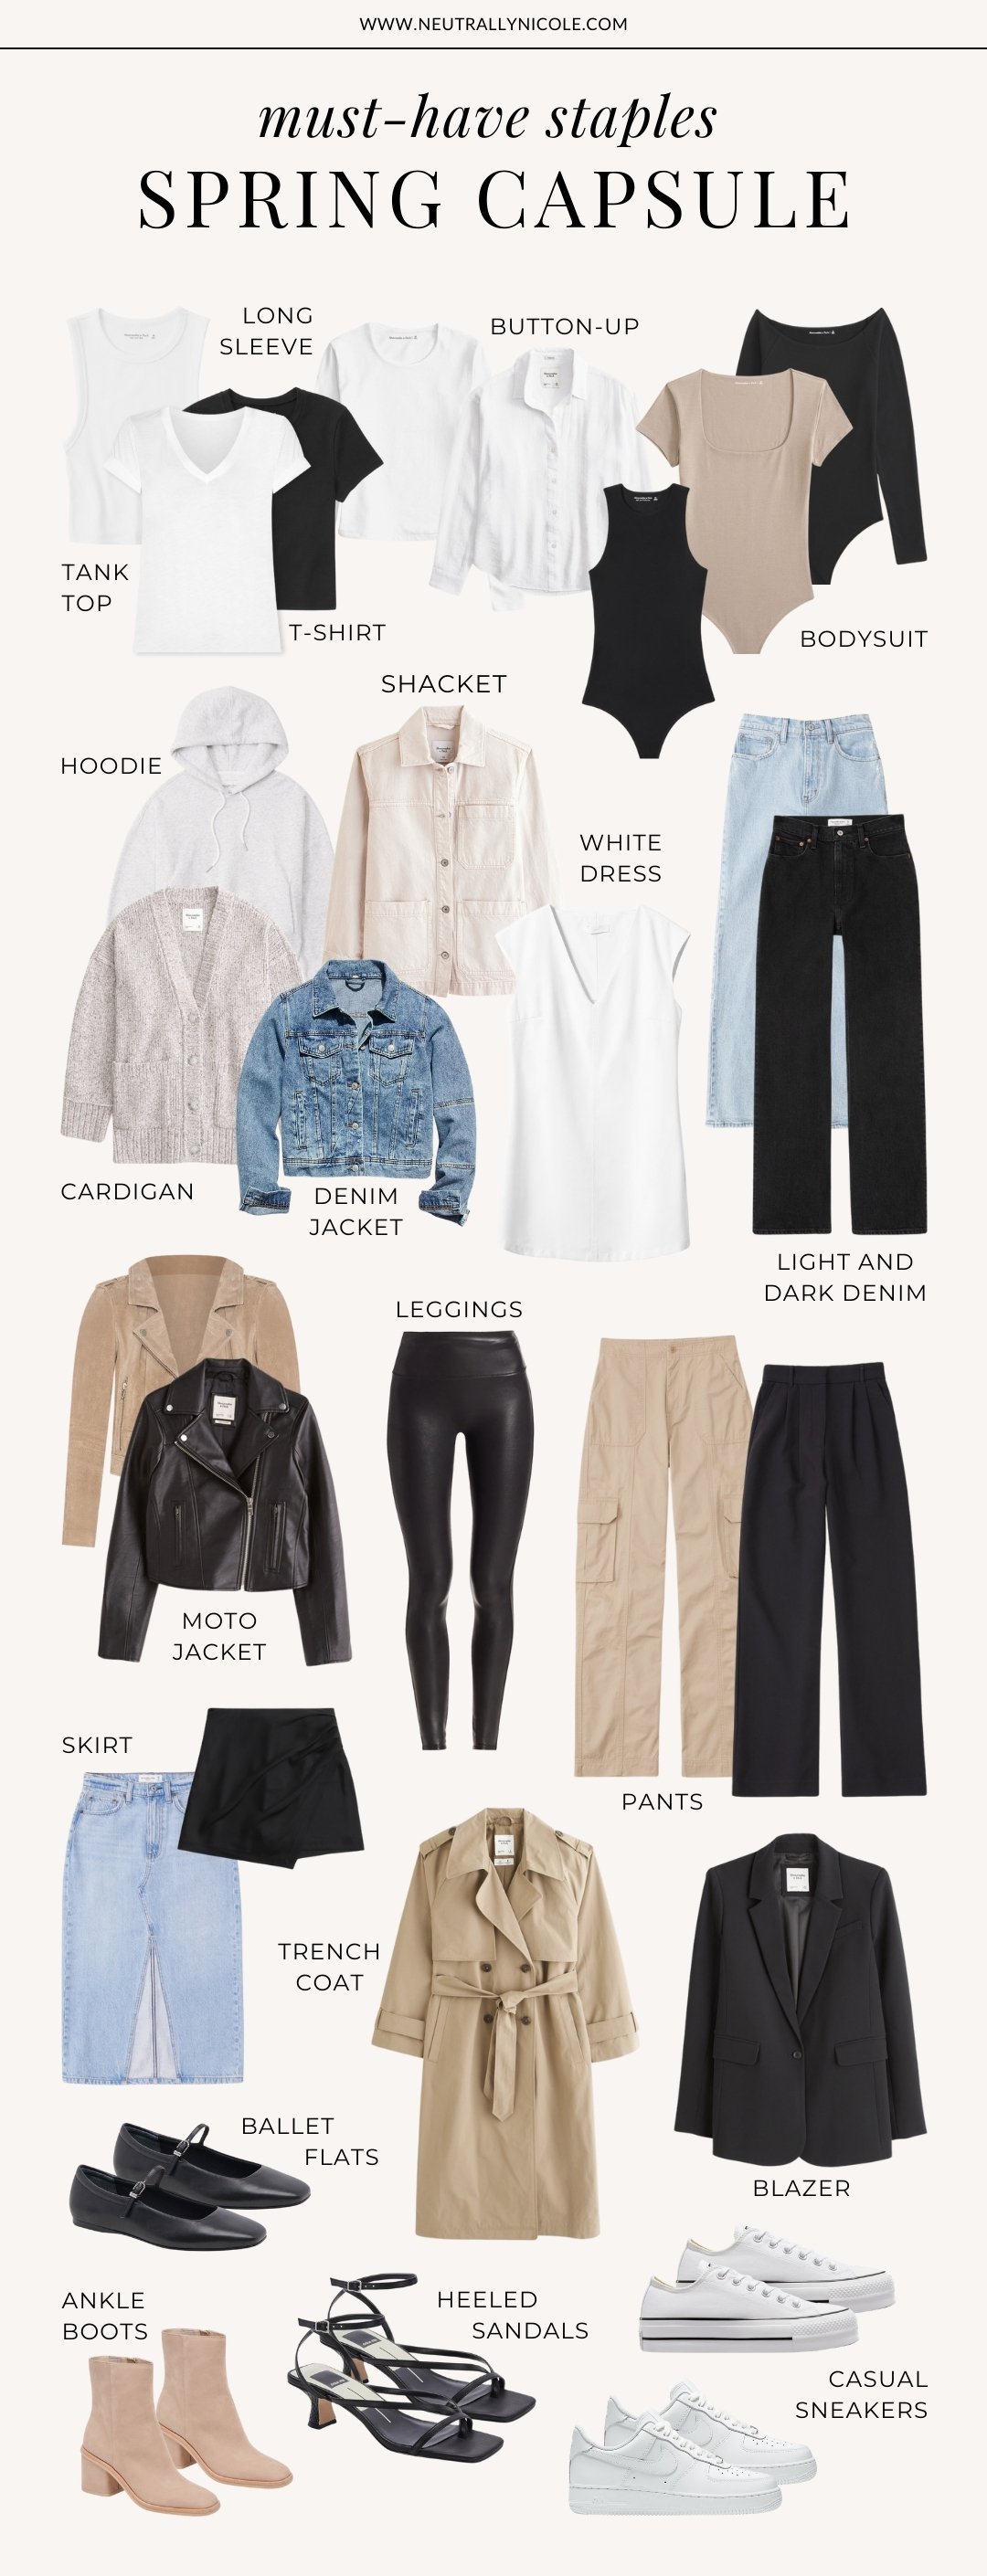 Key Spring Capsule Wardrobe Staples You Need + Easy Outfit Ideas